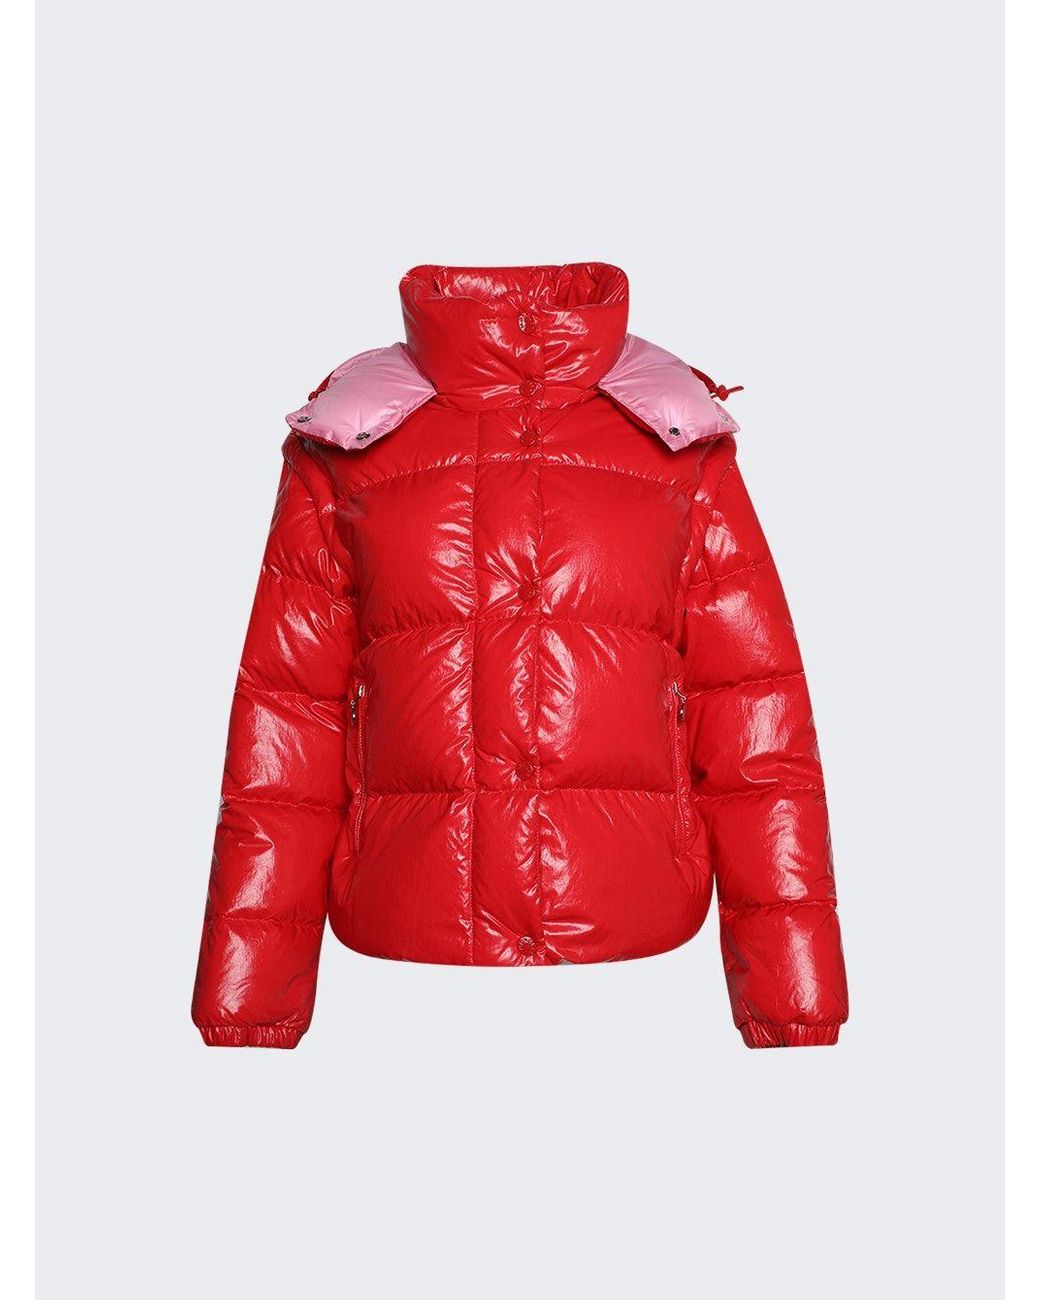 Moncler Mauleon Puffer Jacket in Red | Lyst